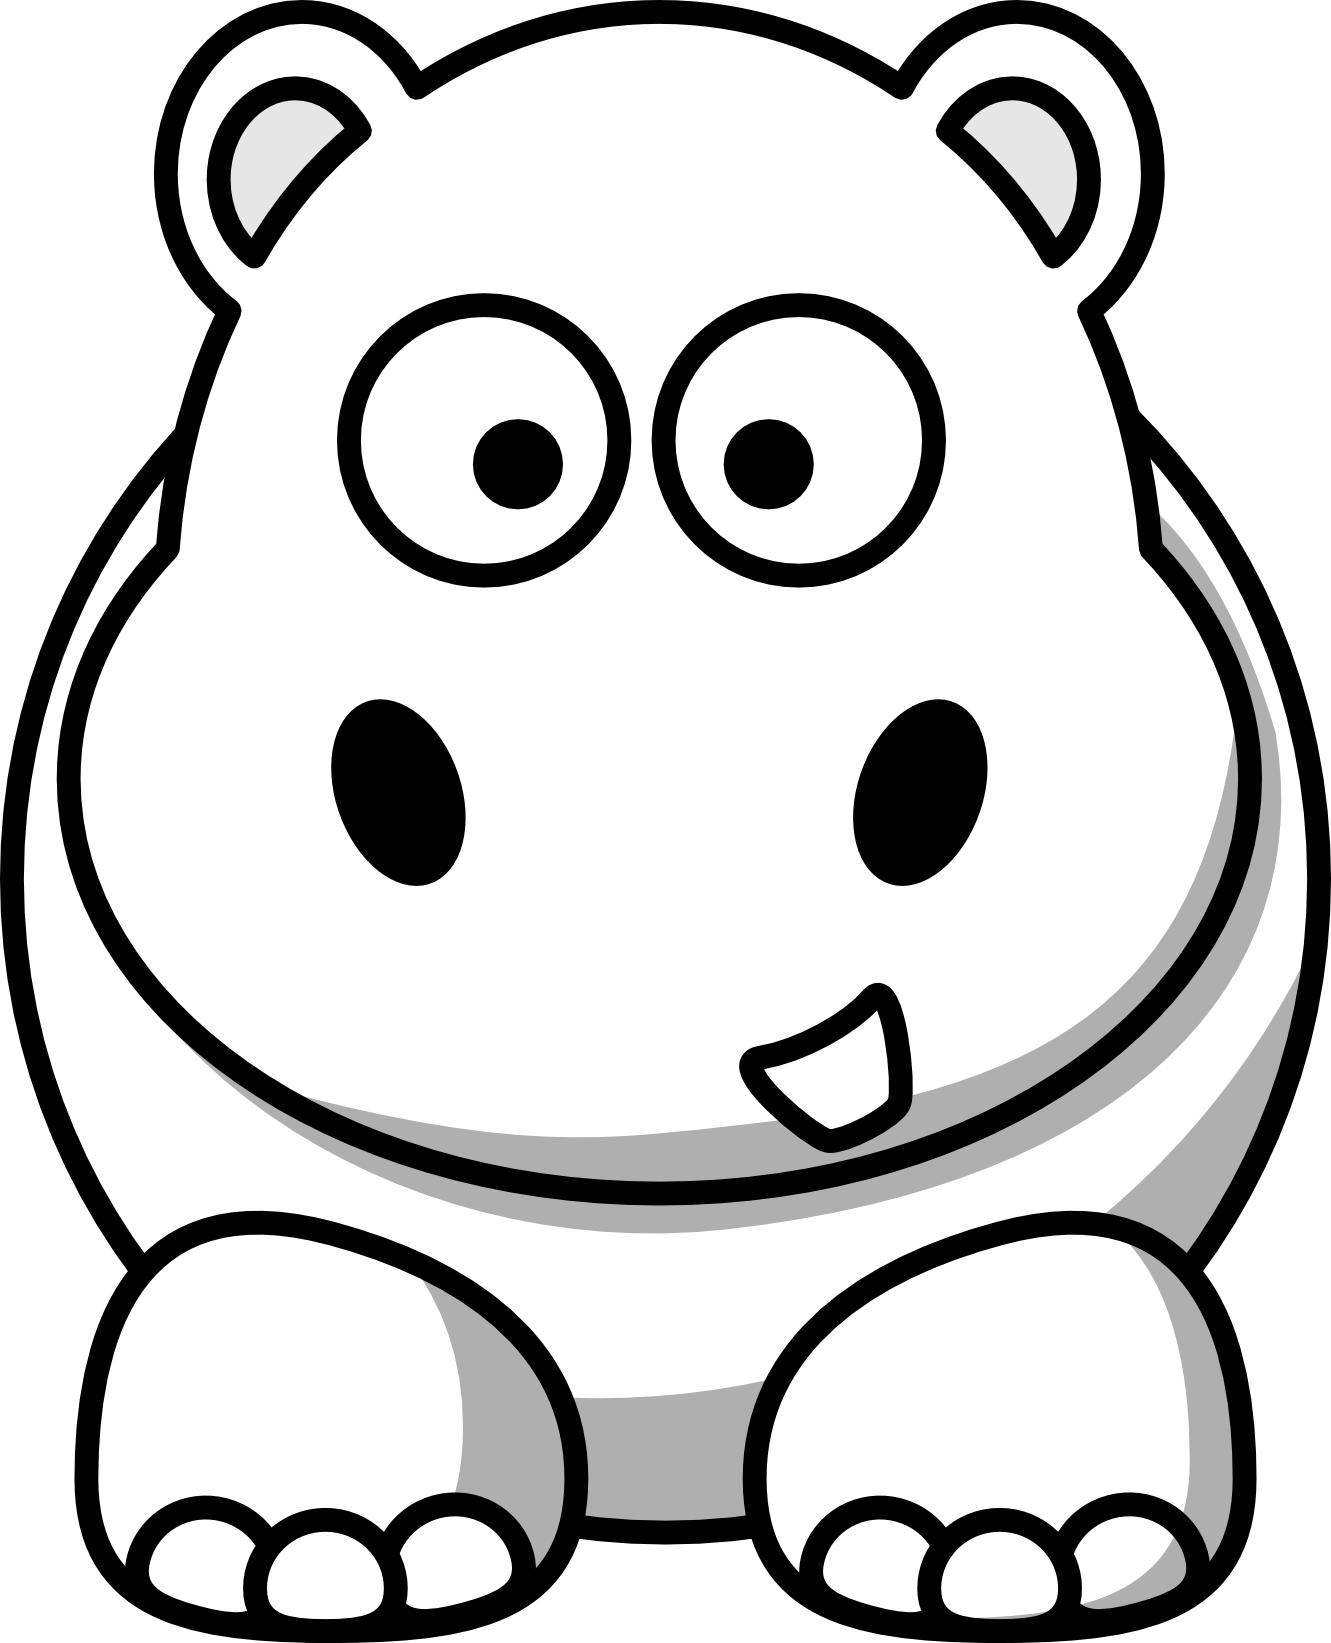 Hippo clipart free images 7